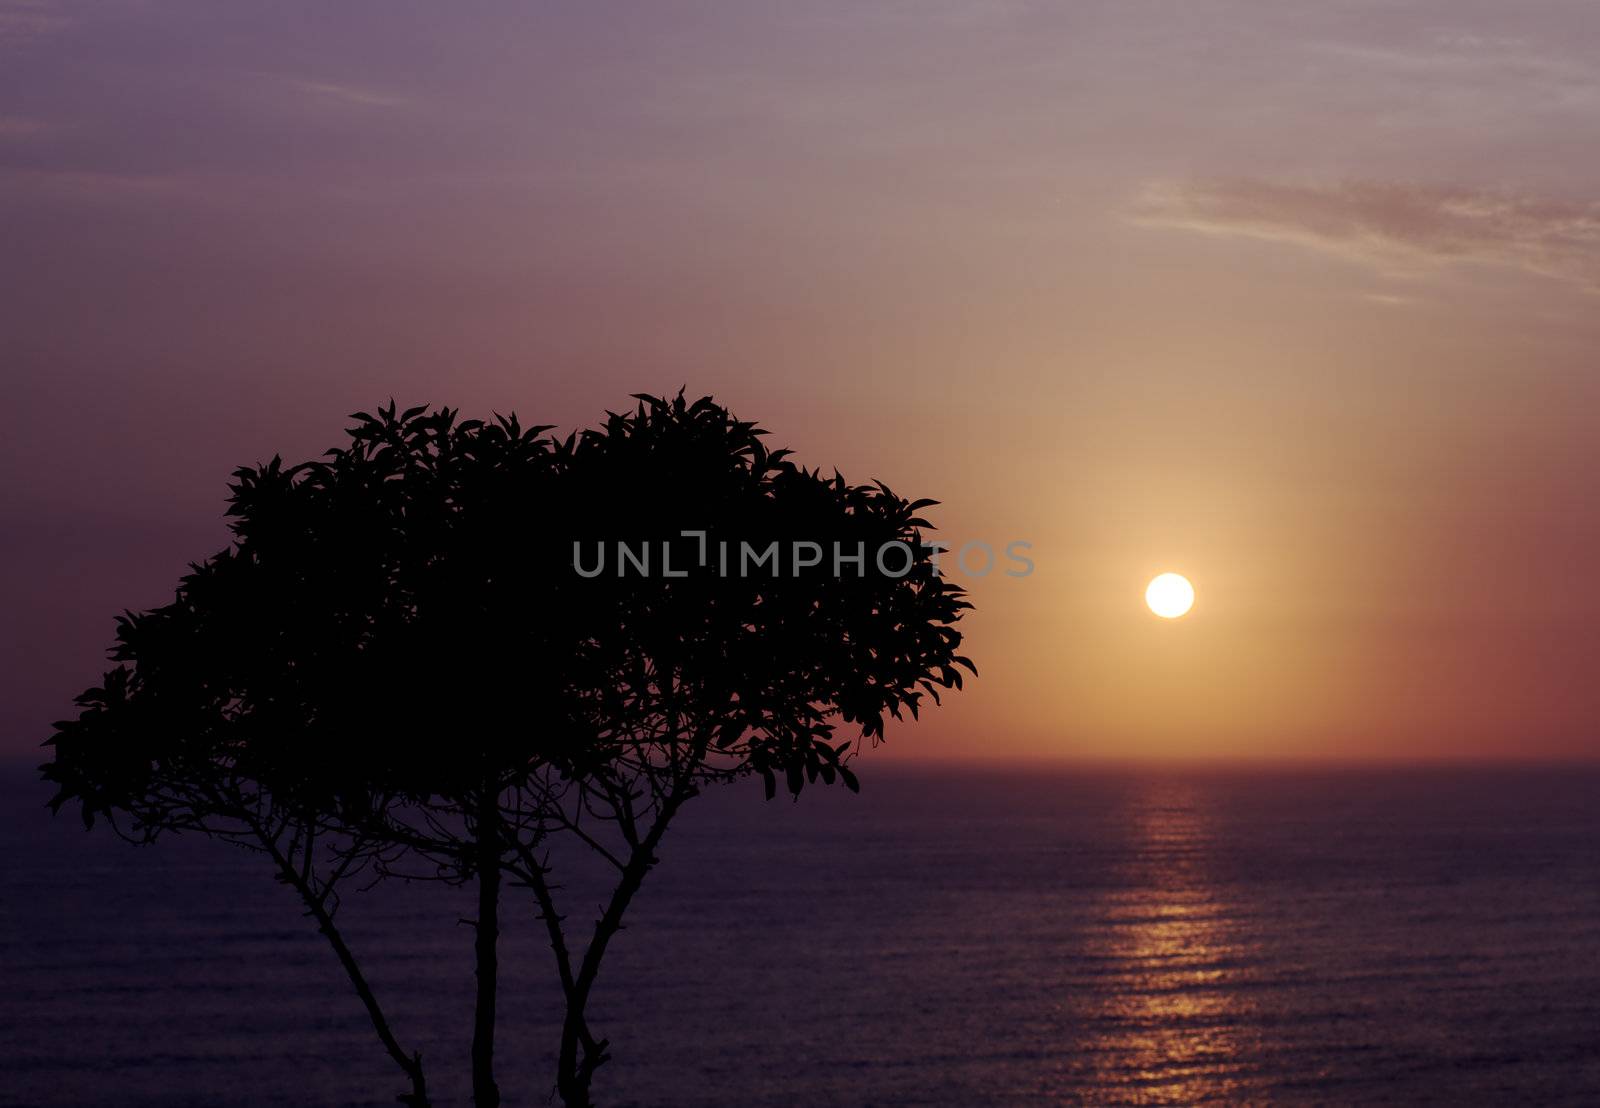 The black silhouette of a tree at sunset with the sea and the setting sun in the background